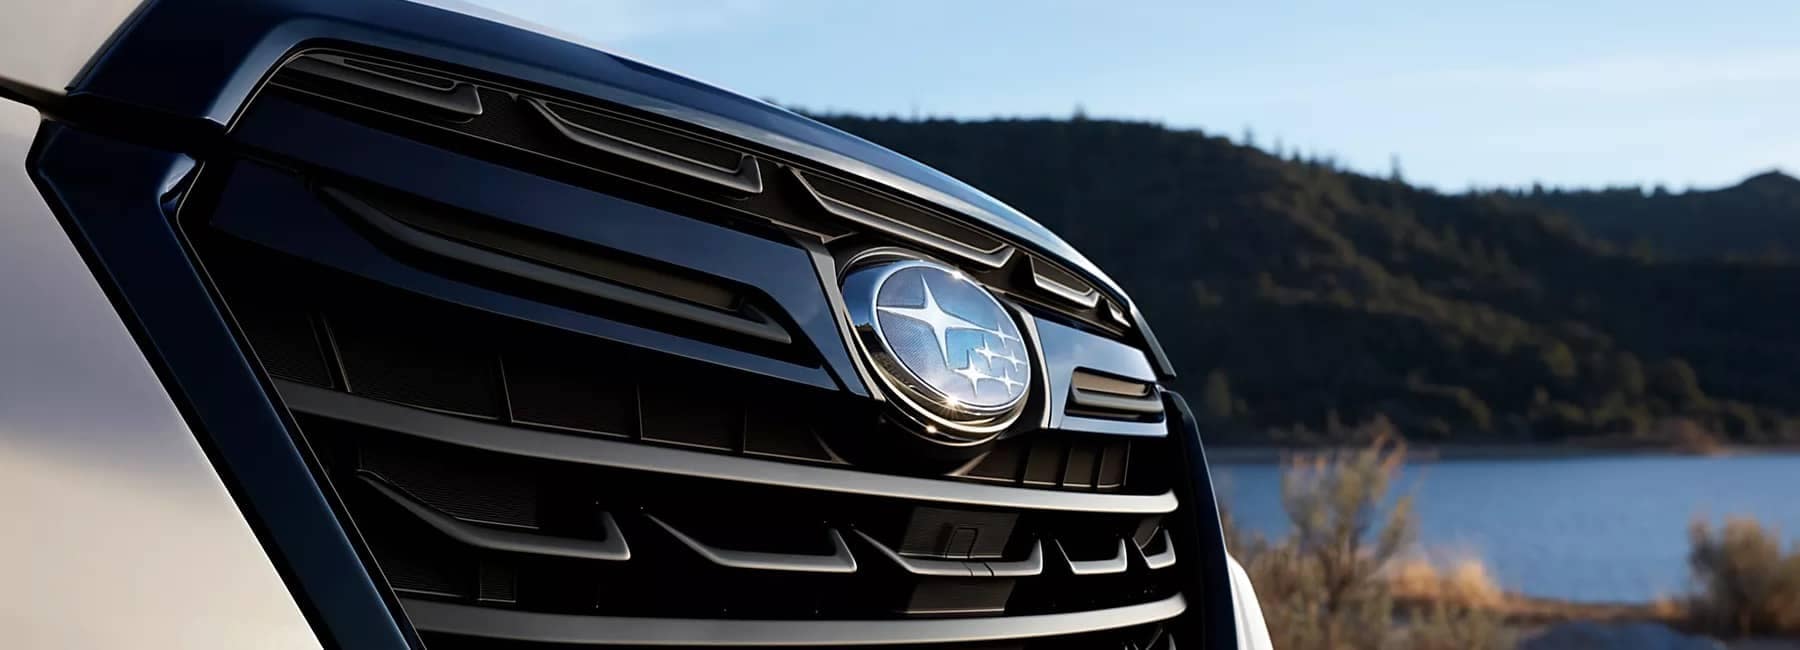 2022 Subaru Forester Sport grille with black finish